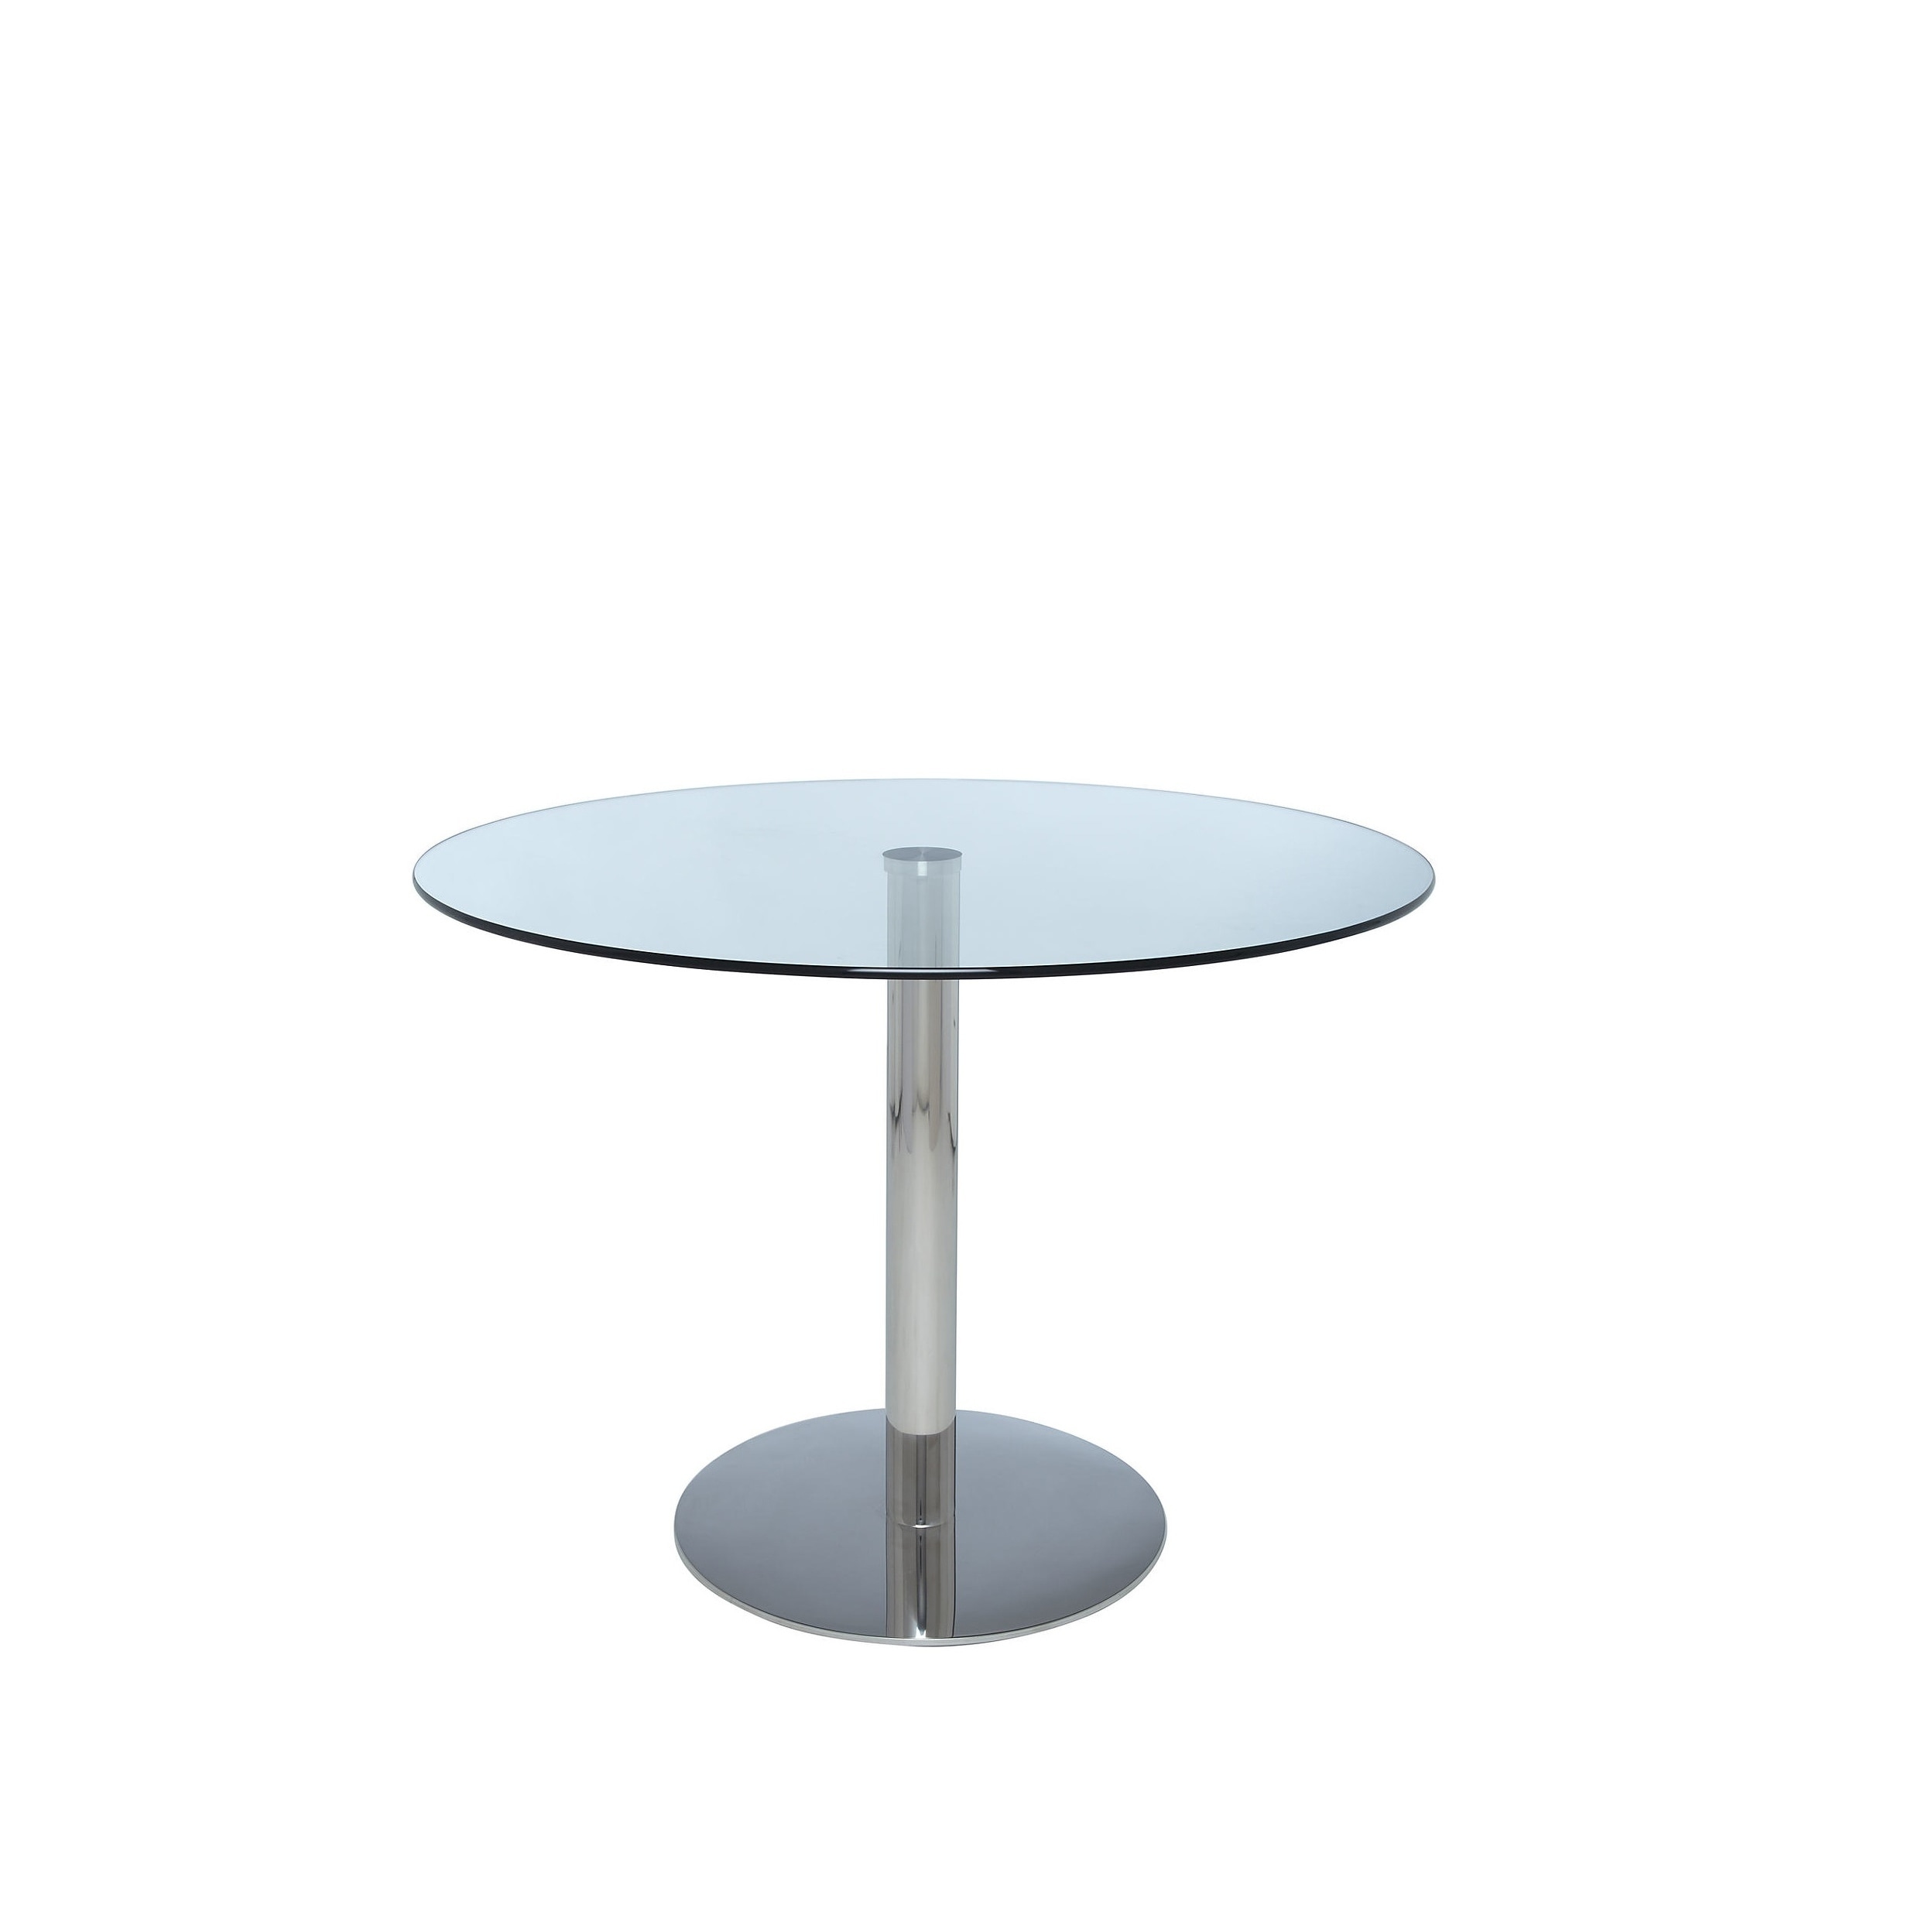 Clear glass Top with Chrome pedestal 39" Dining table